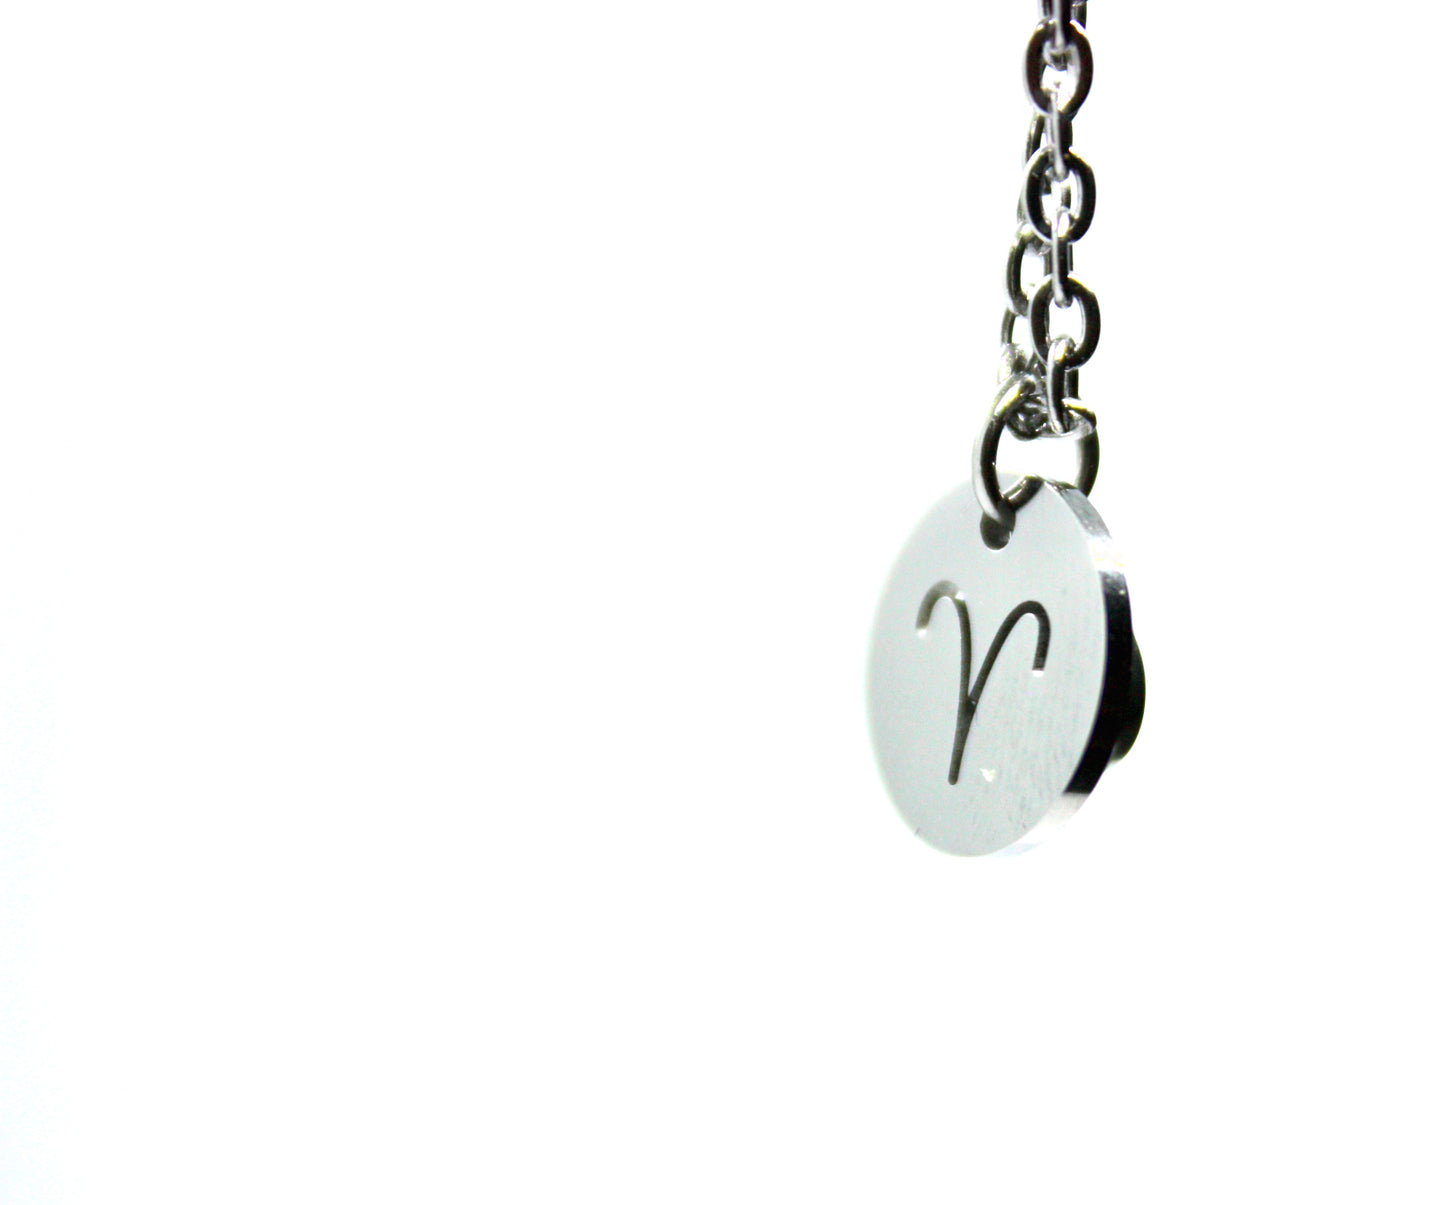 Aries Star Sign Pendant and Necklace